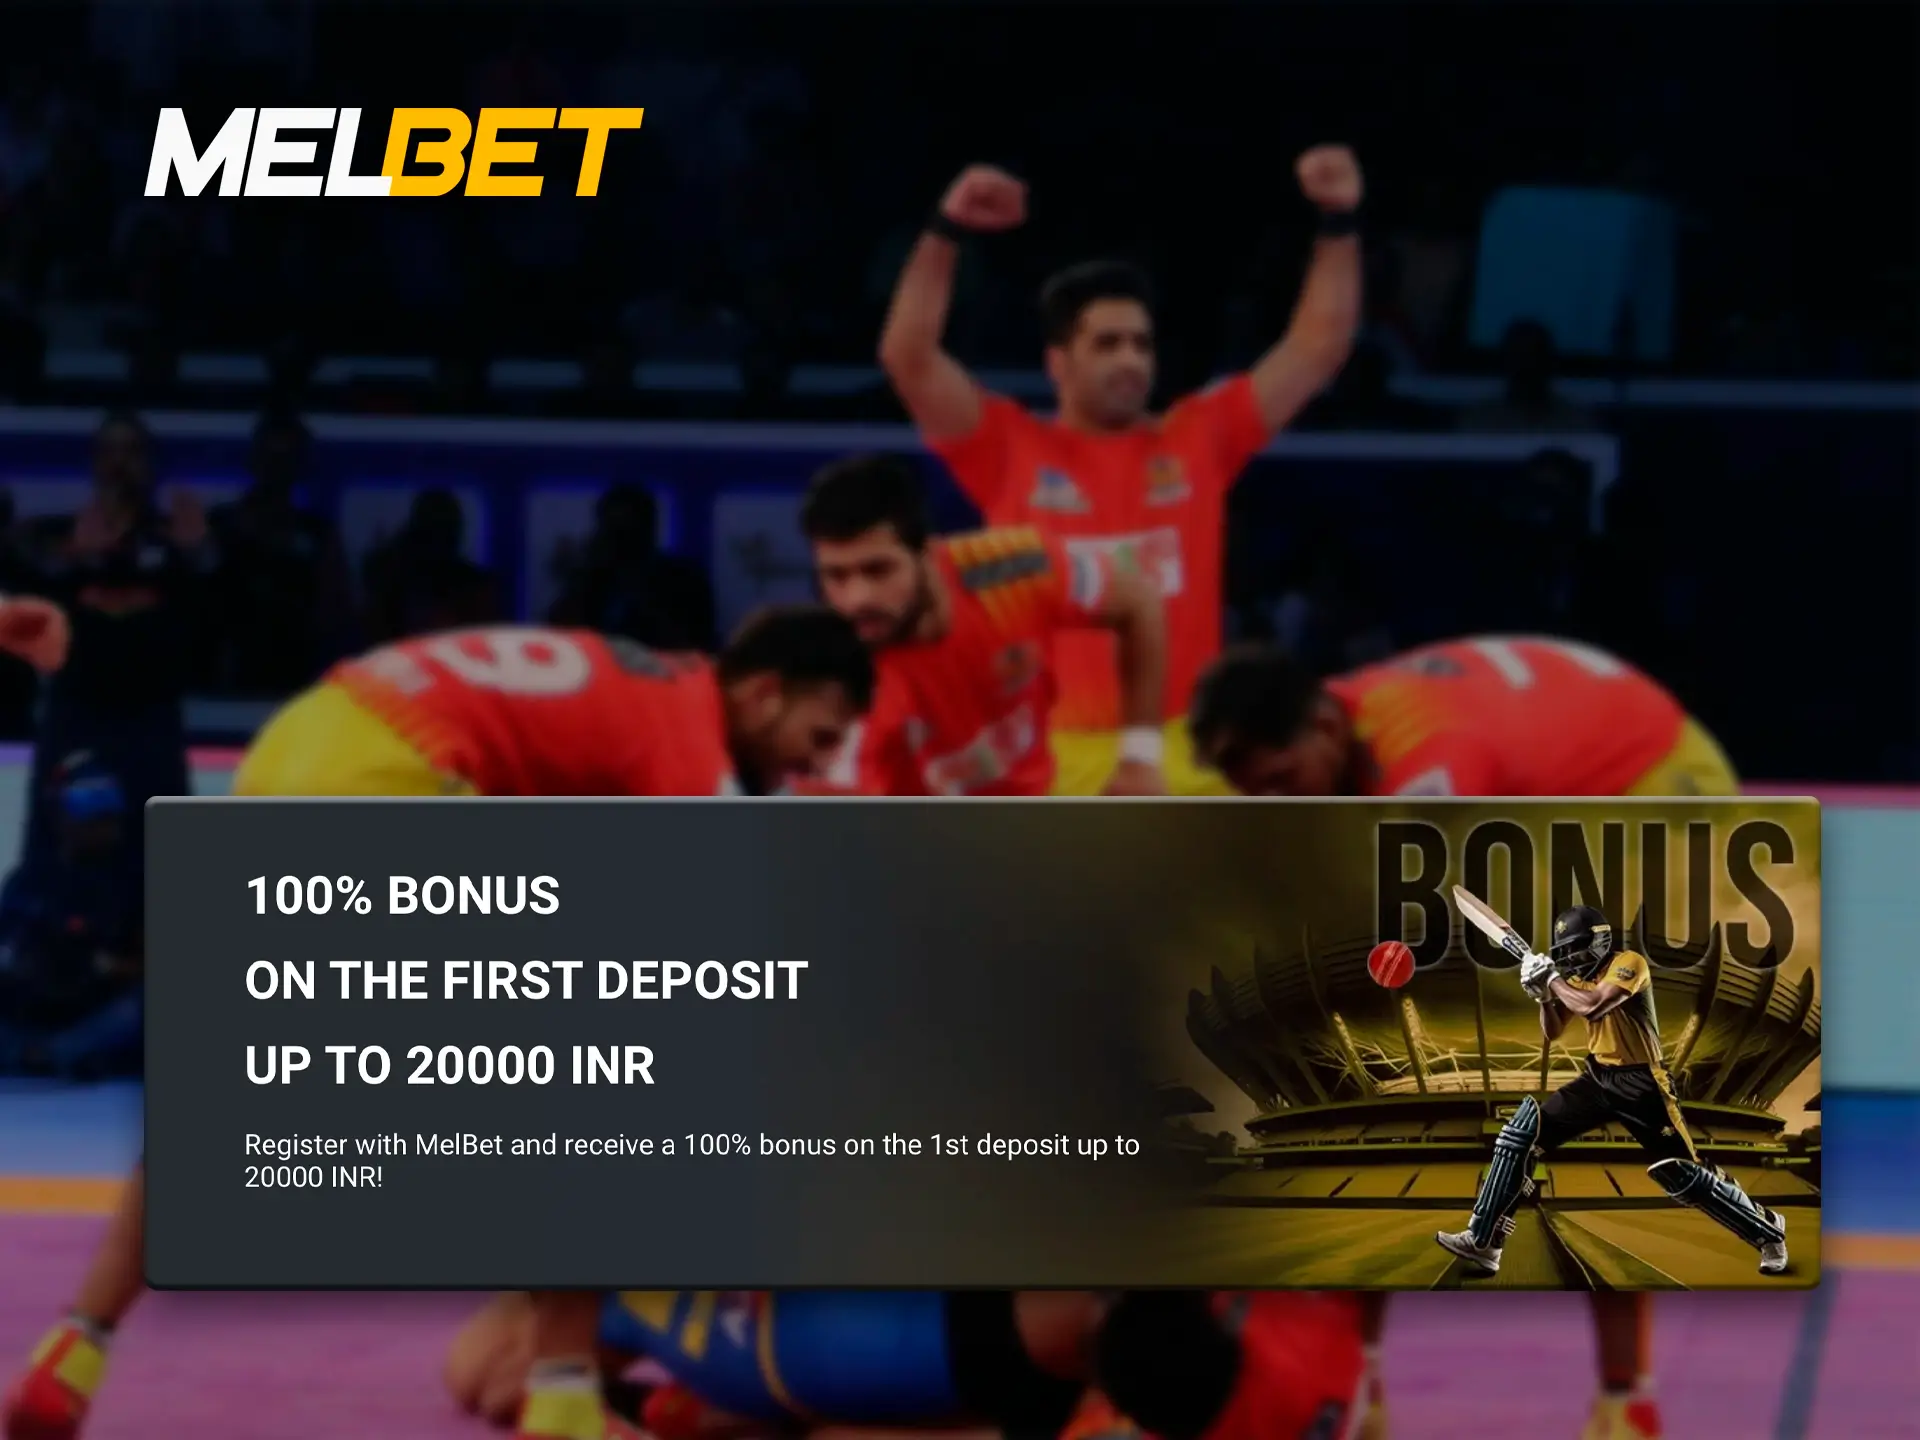 Melbet and their bonuses will allow you to claim decent winnings in Kabaddi predictions.